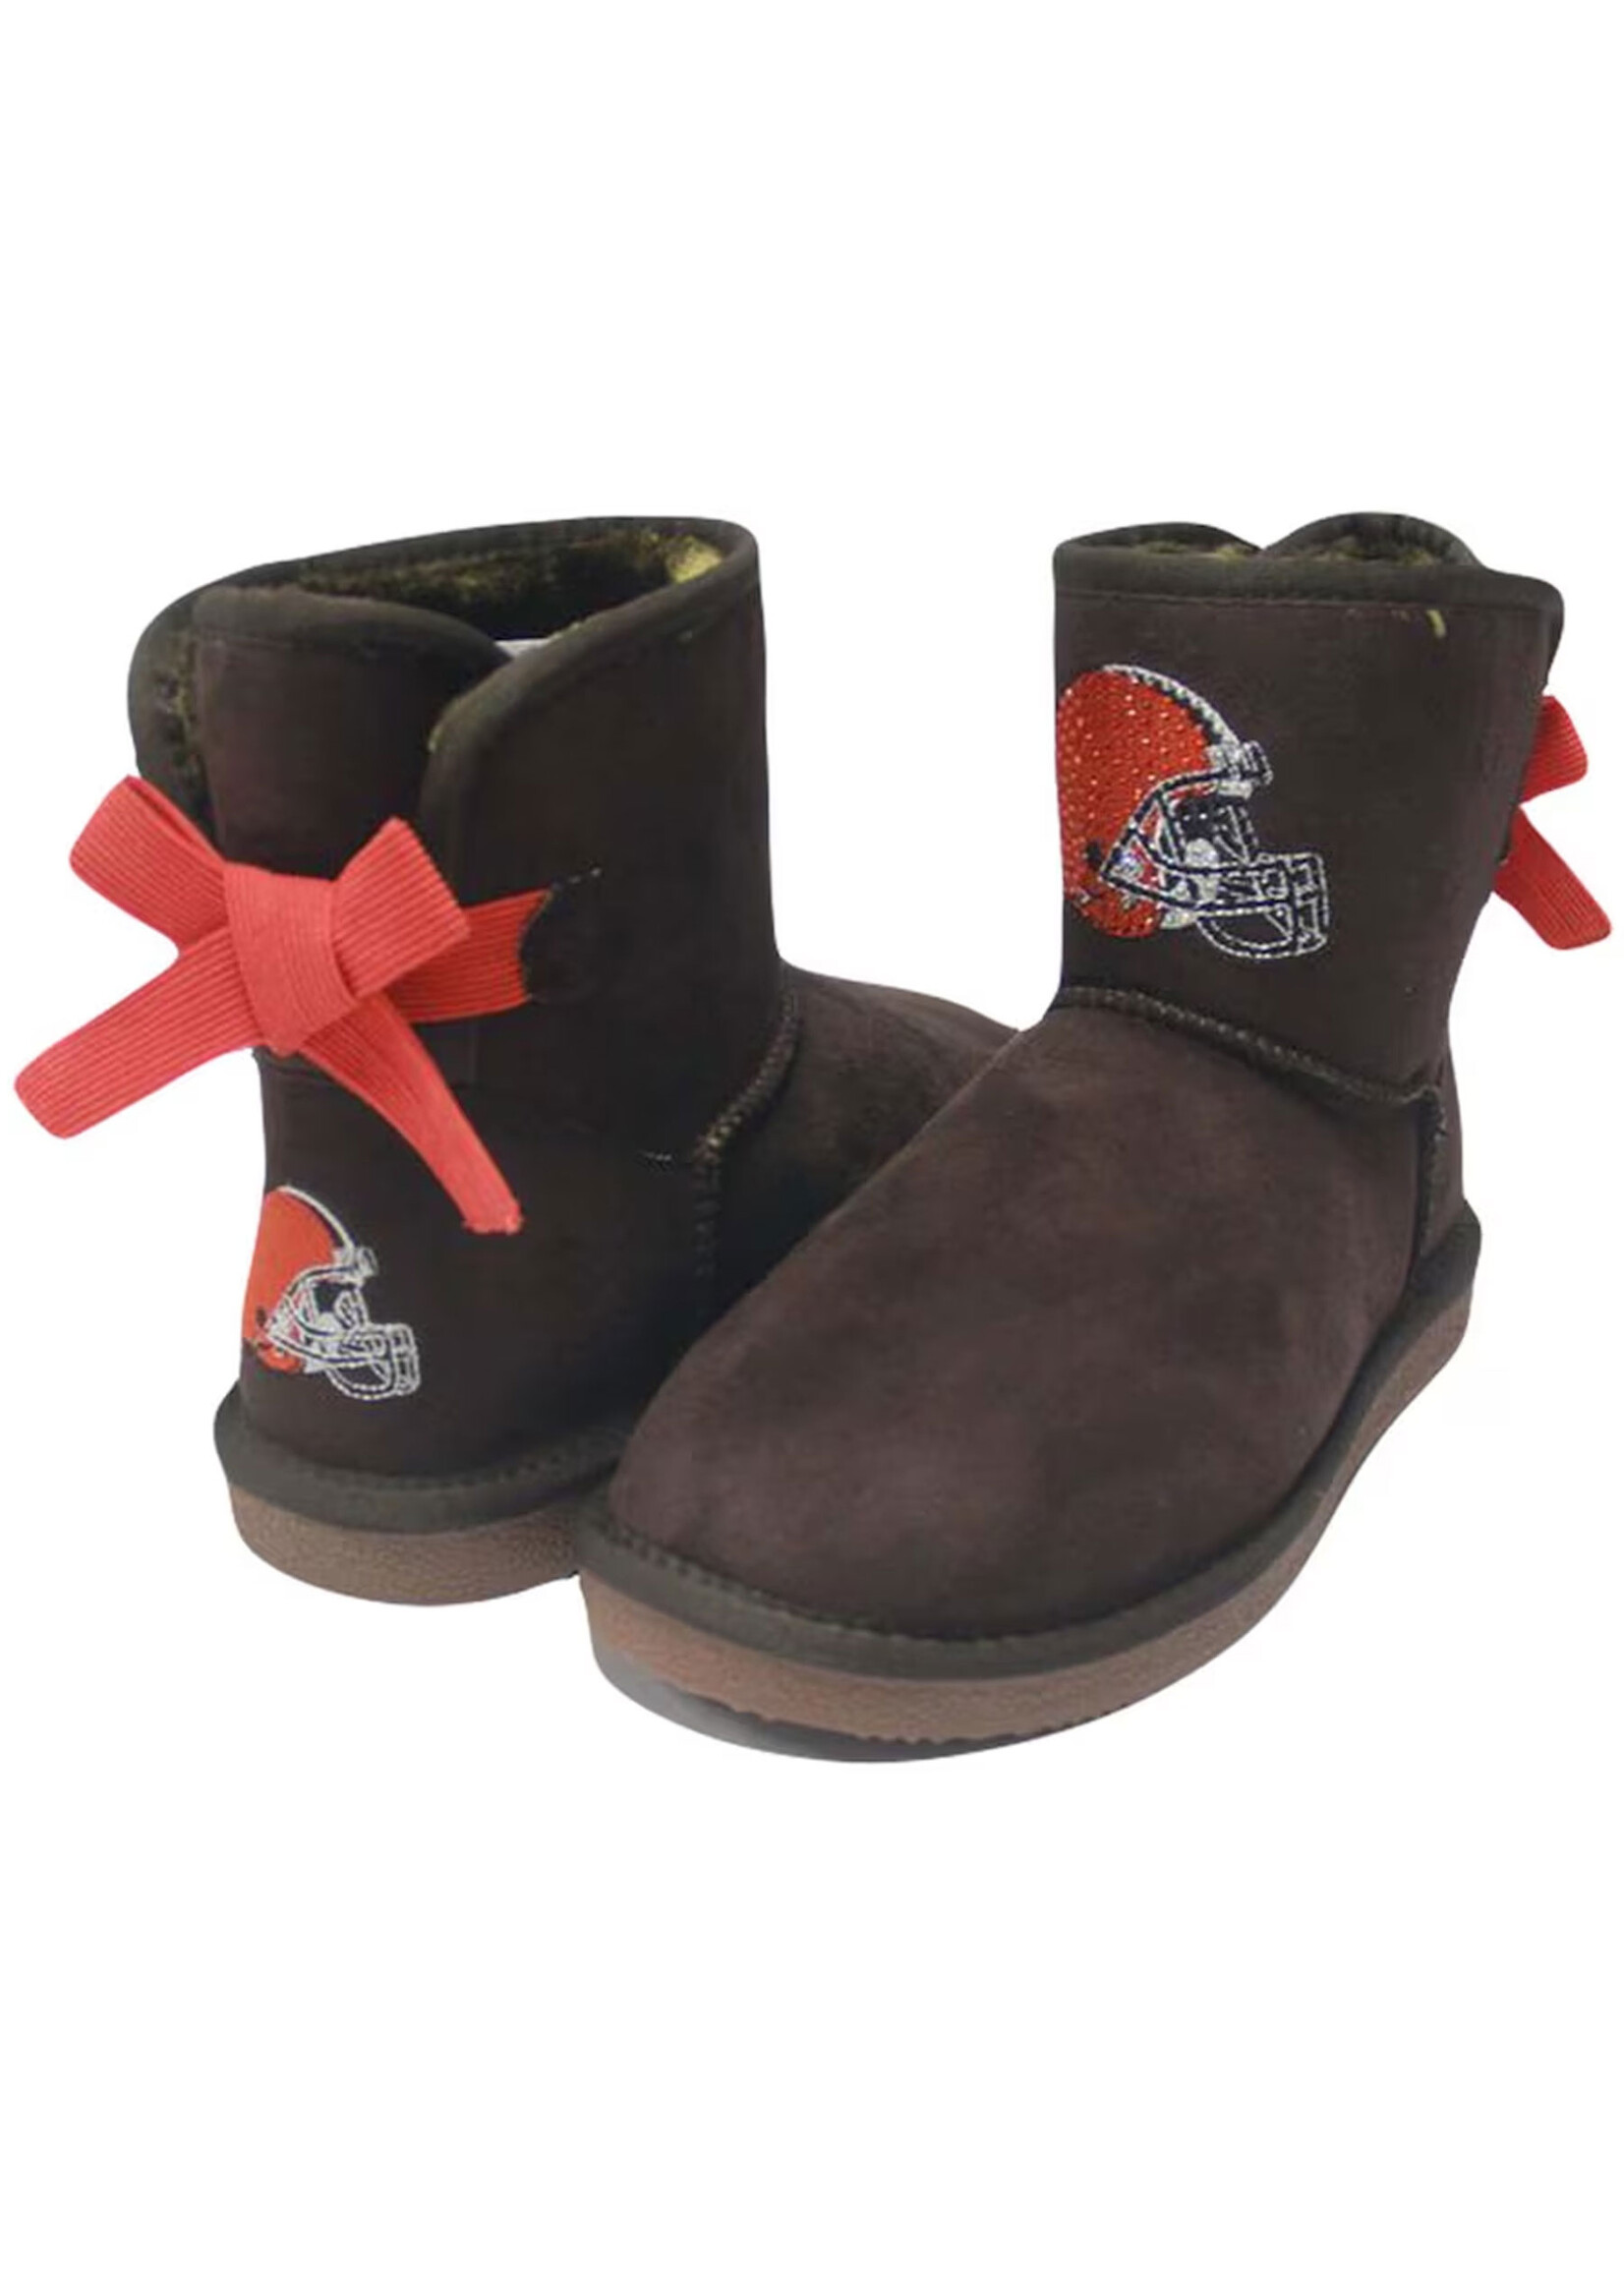 Cleveland Browns Cuce Women's Low Team Ribbon Boots